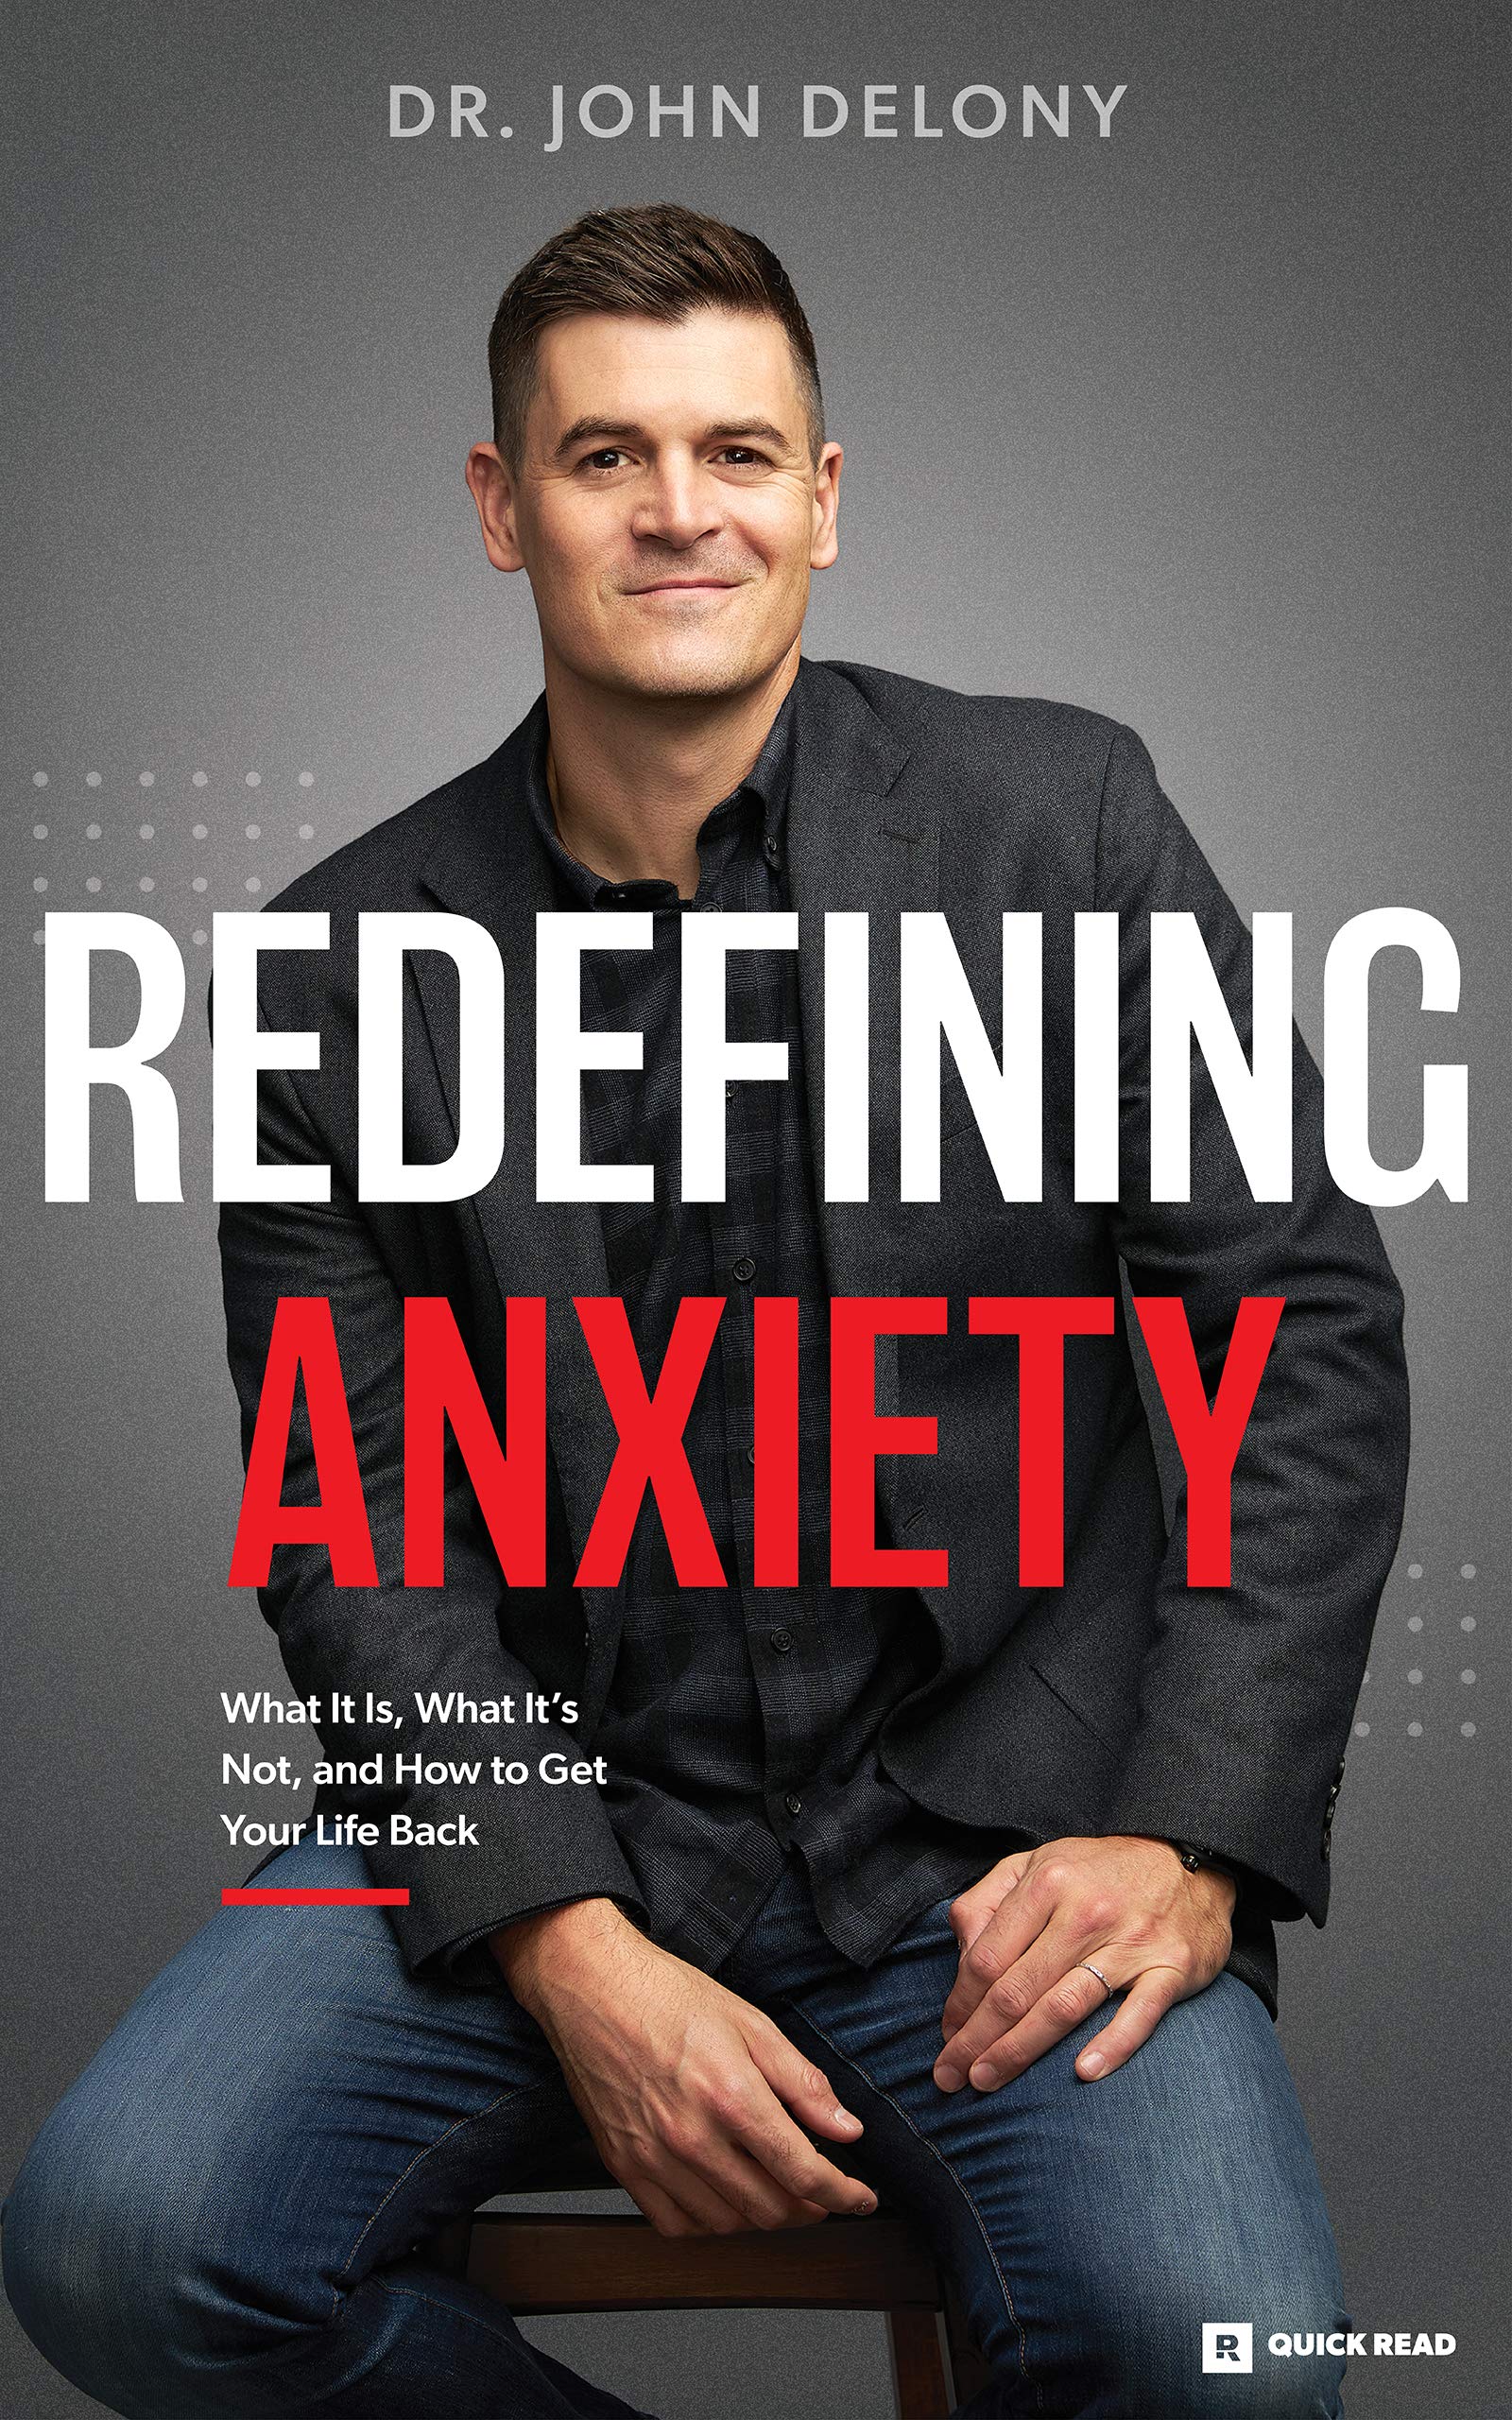 Redefining Anxiety by Dr. John Delony